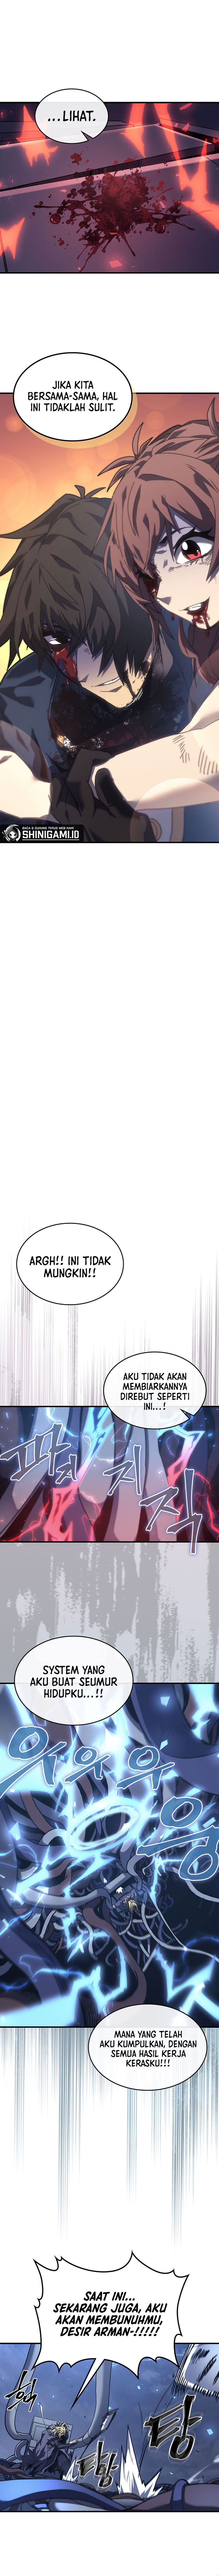 a-returners-magic-should-be-special-indo Chapter 225